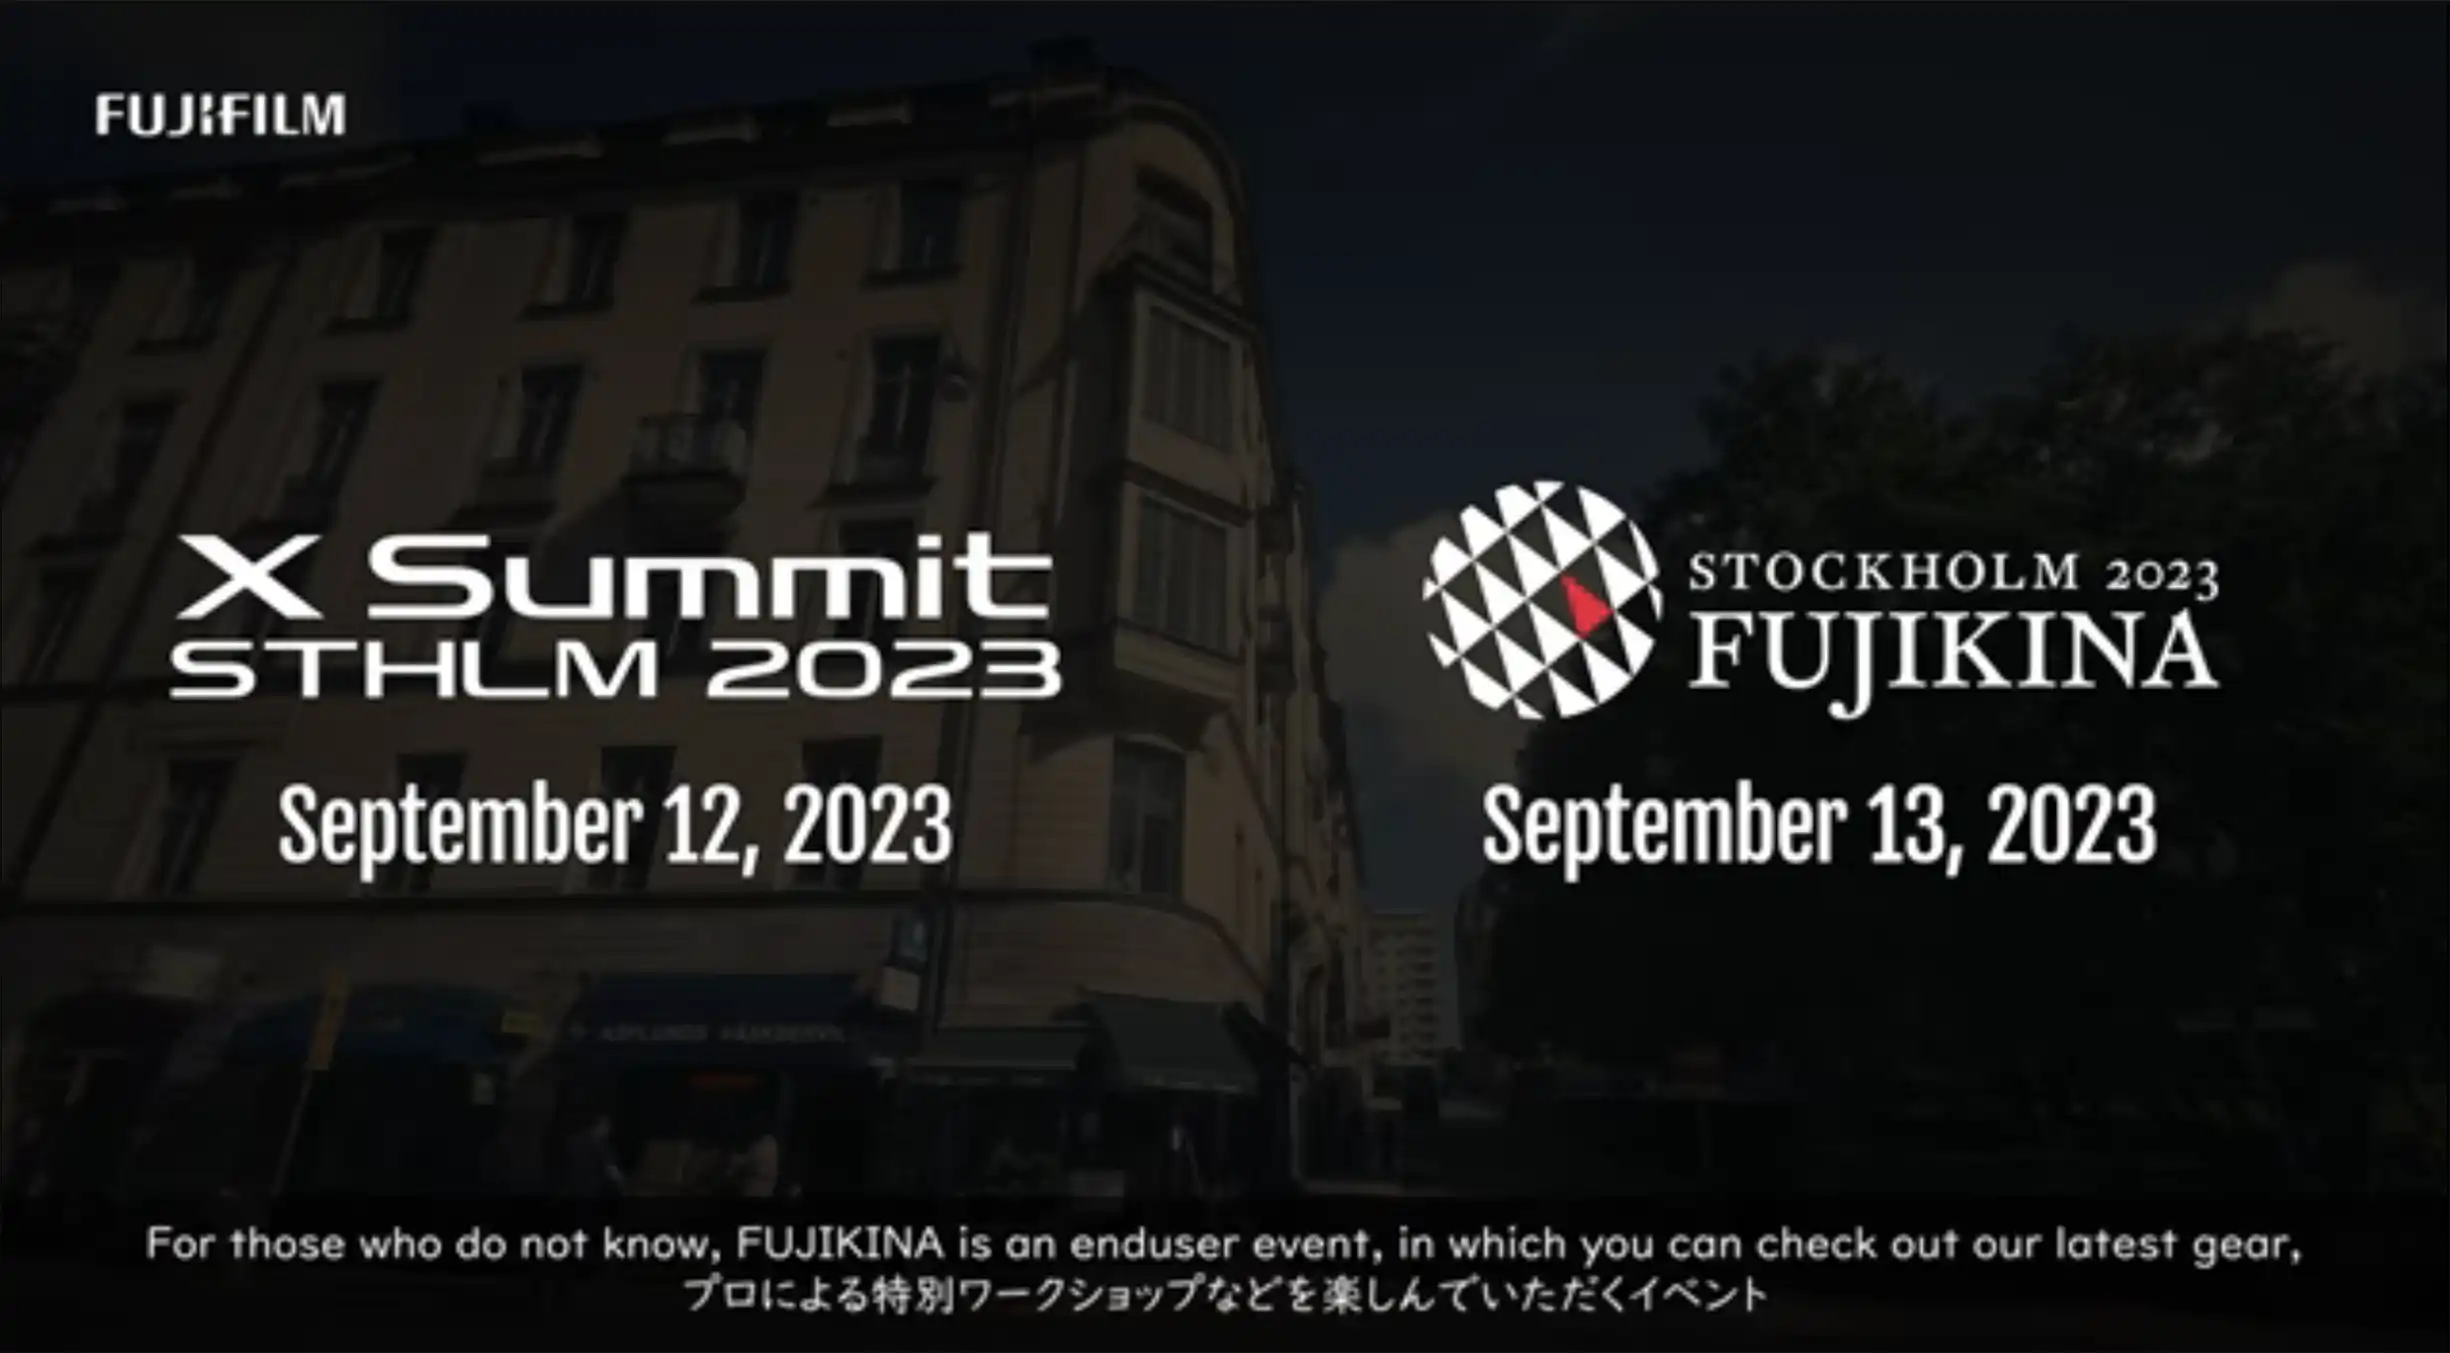 X Summit and Fujikina 2023 coming to Stockholm on September 12th, here is what to expect - Rumors